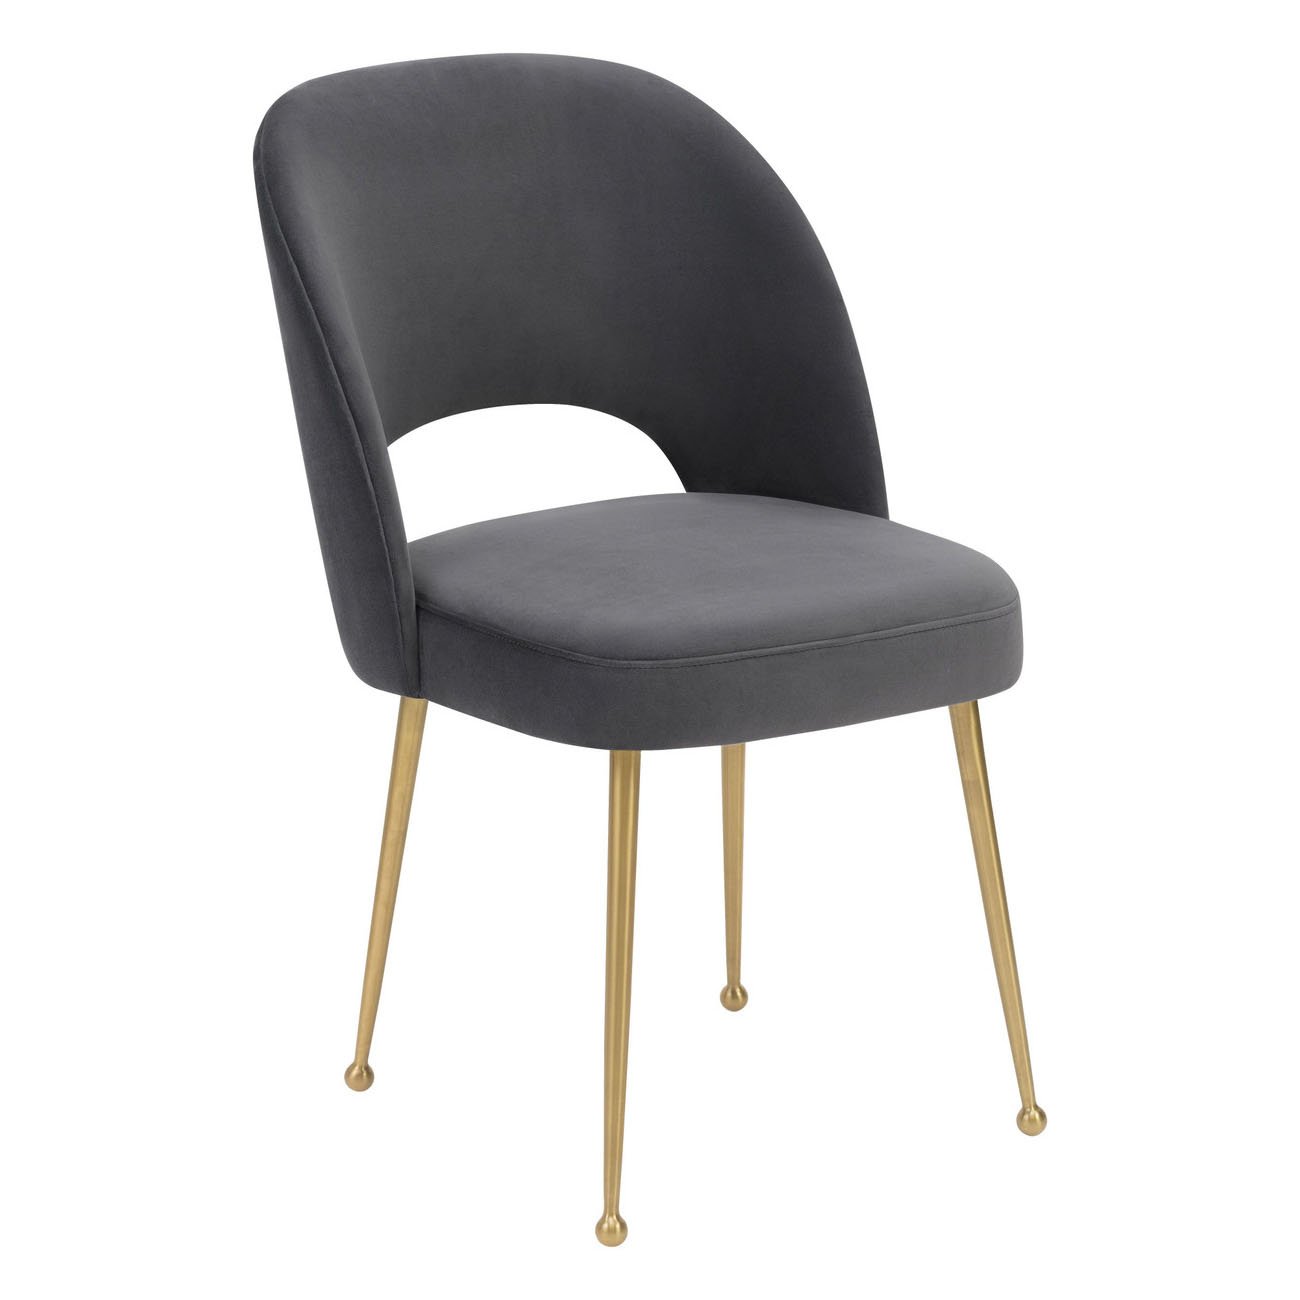 Tov-Swell Velvet Chair-Dining Chairs-MODTEMPO